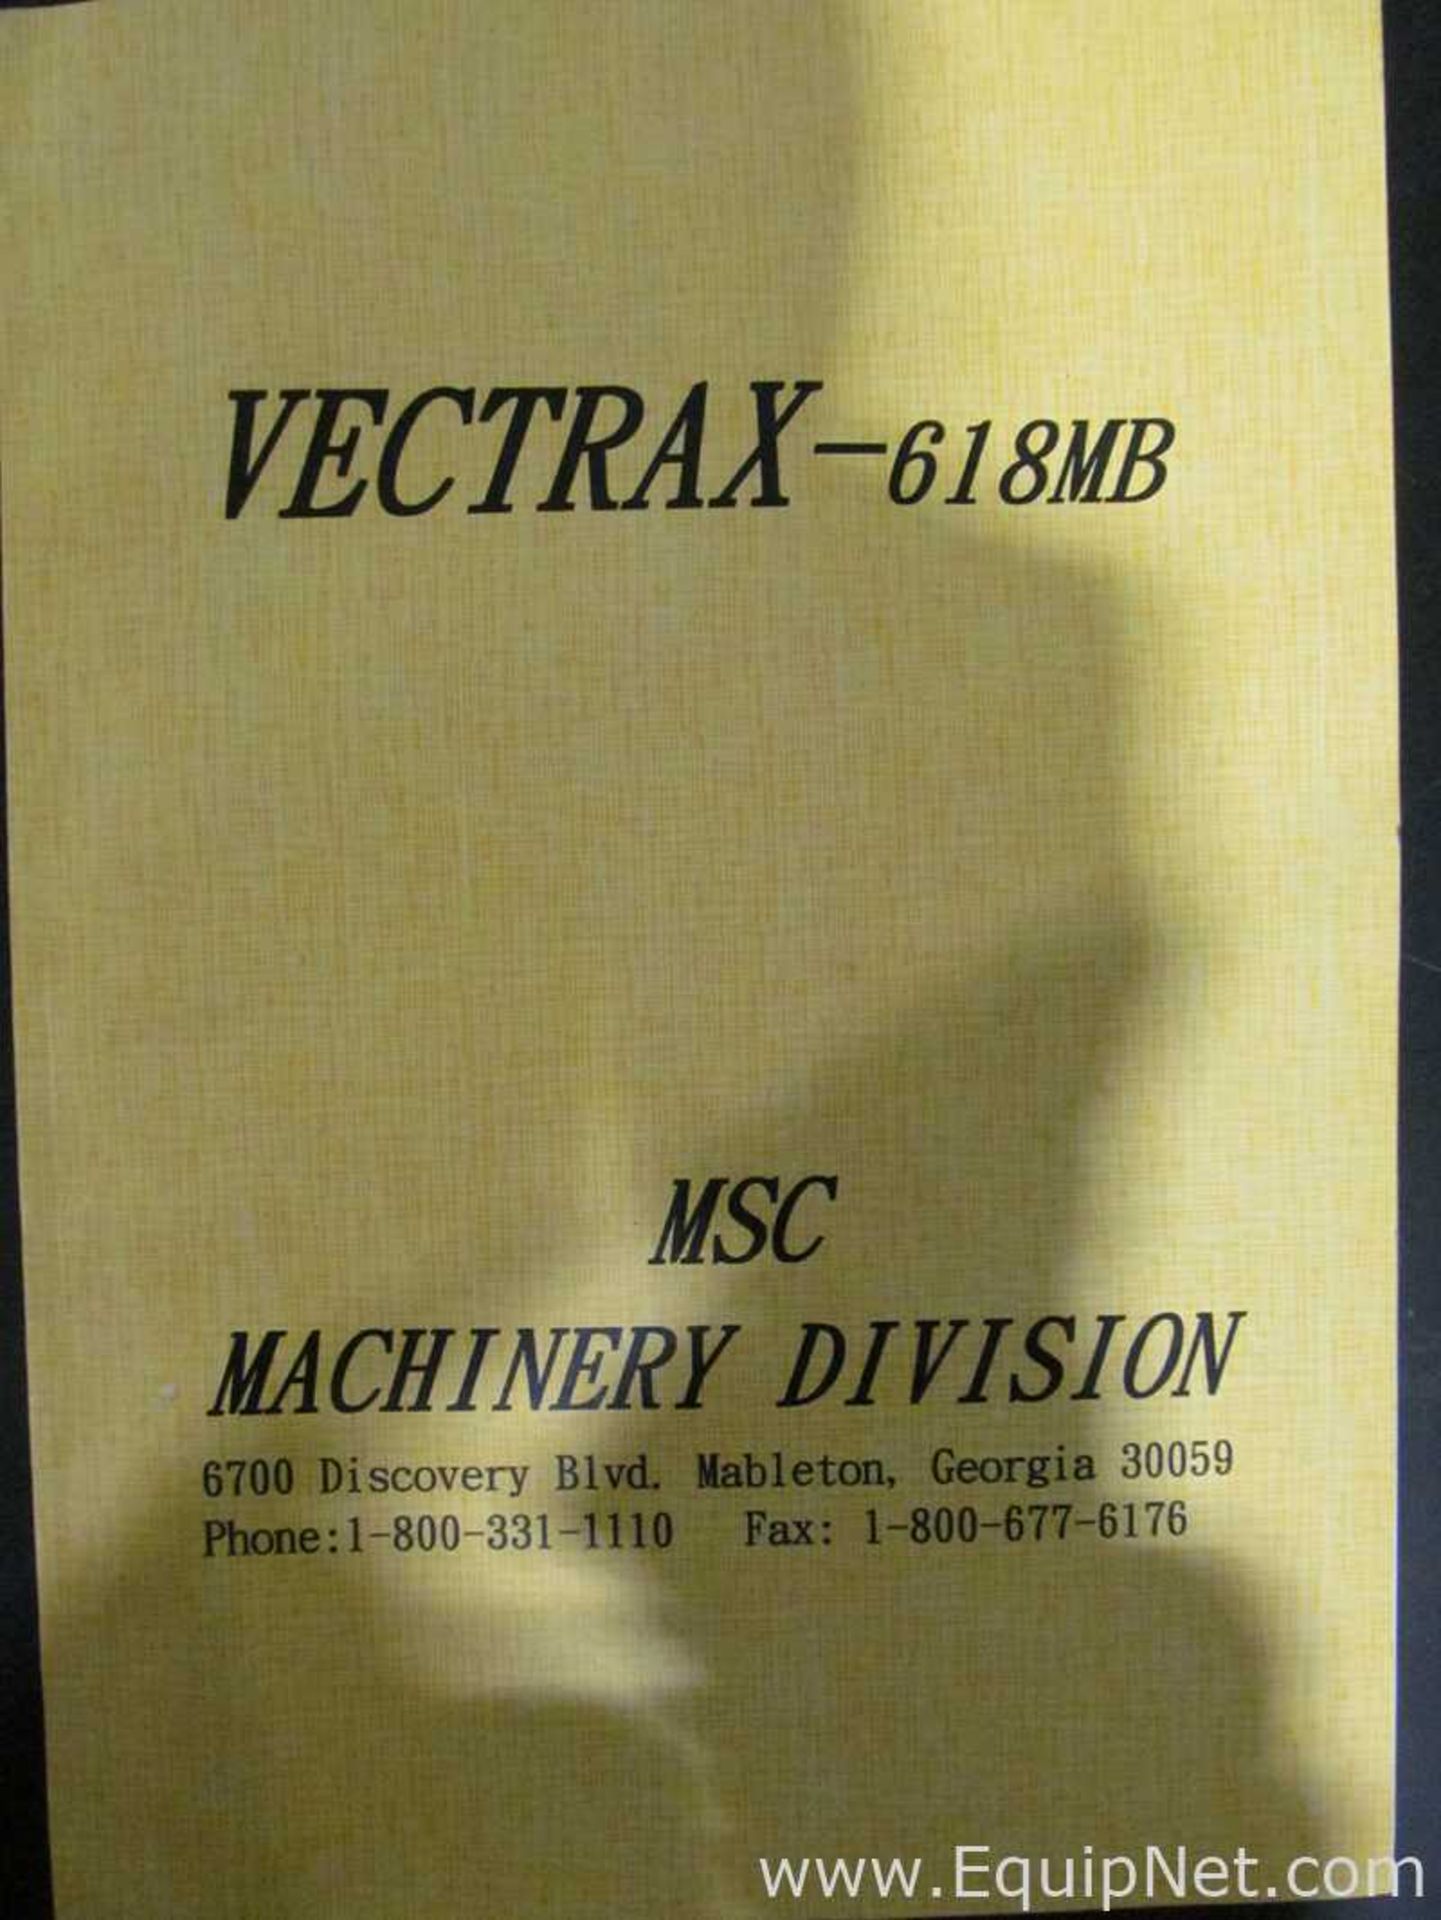 Vectrax JL-618MB 8 Inch Wheel Surface Grinder With Integrated Dust-Suction Cooling System - Image 11 of 15